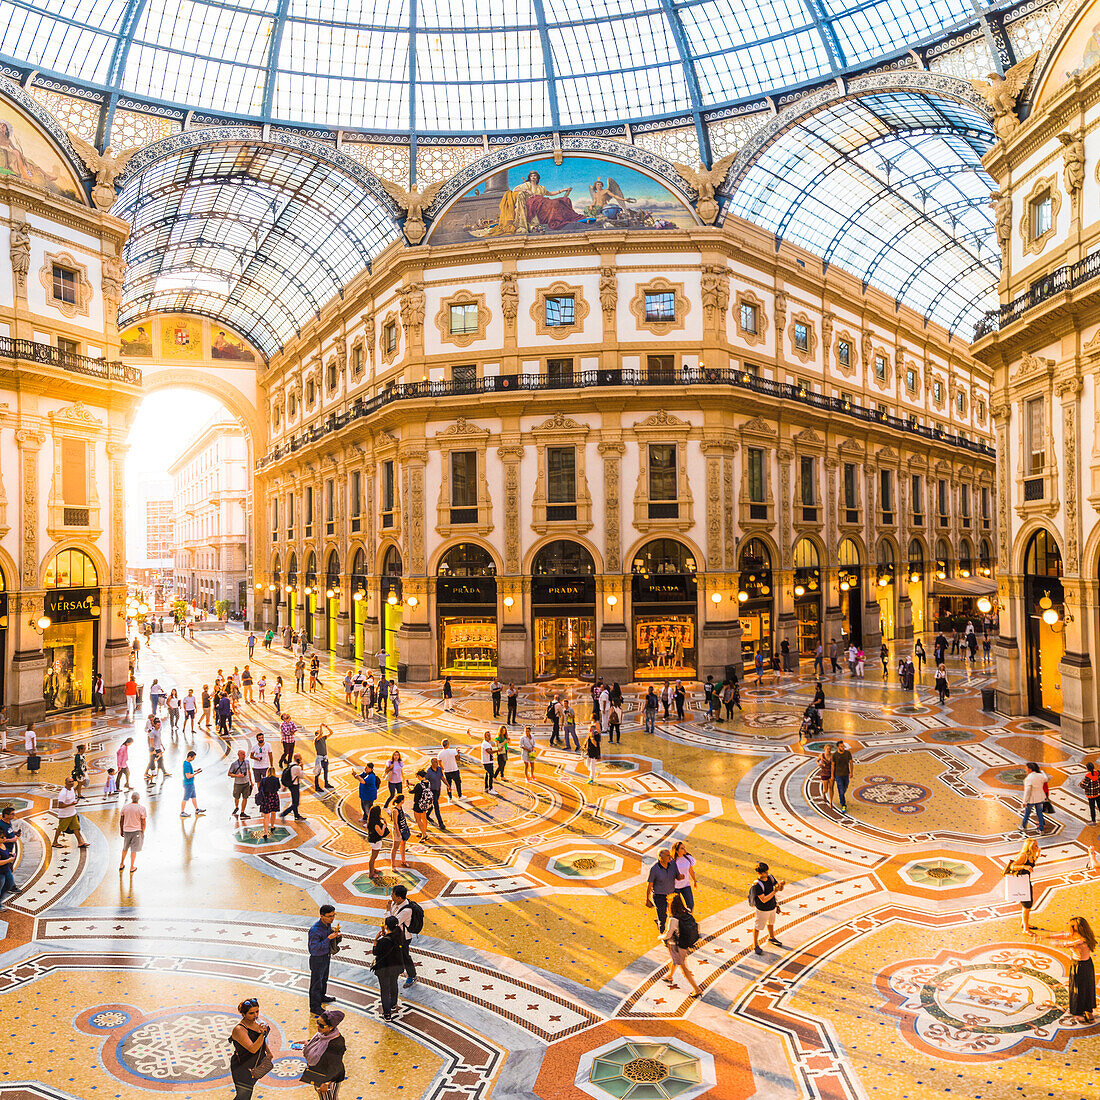 Galleria Vittorio Emanuele II, Milan, Lombardy, Italy. Tourists walking in the world's oldest shopping mall.